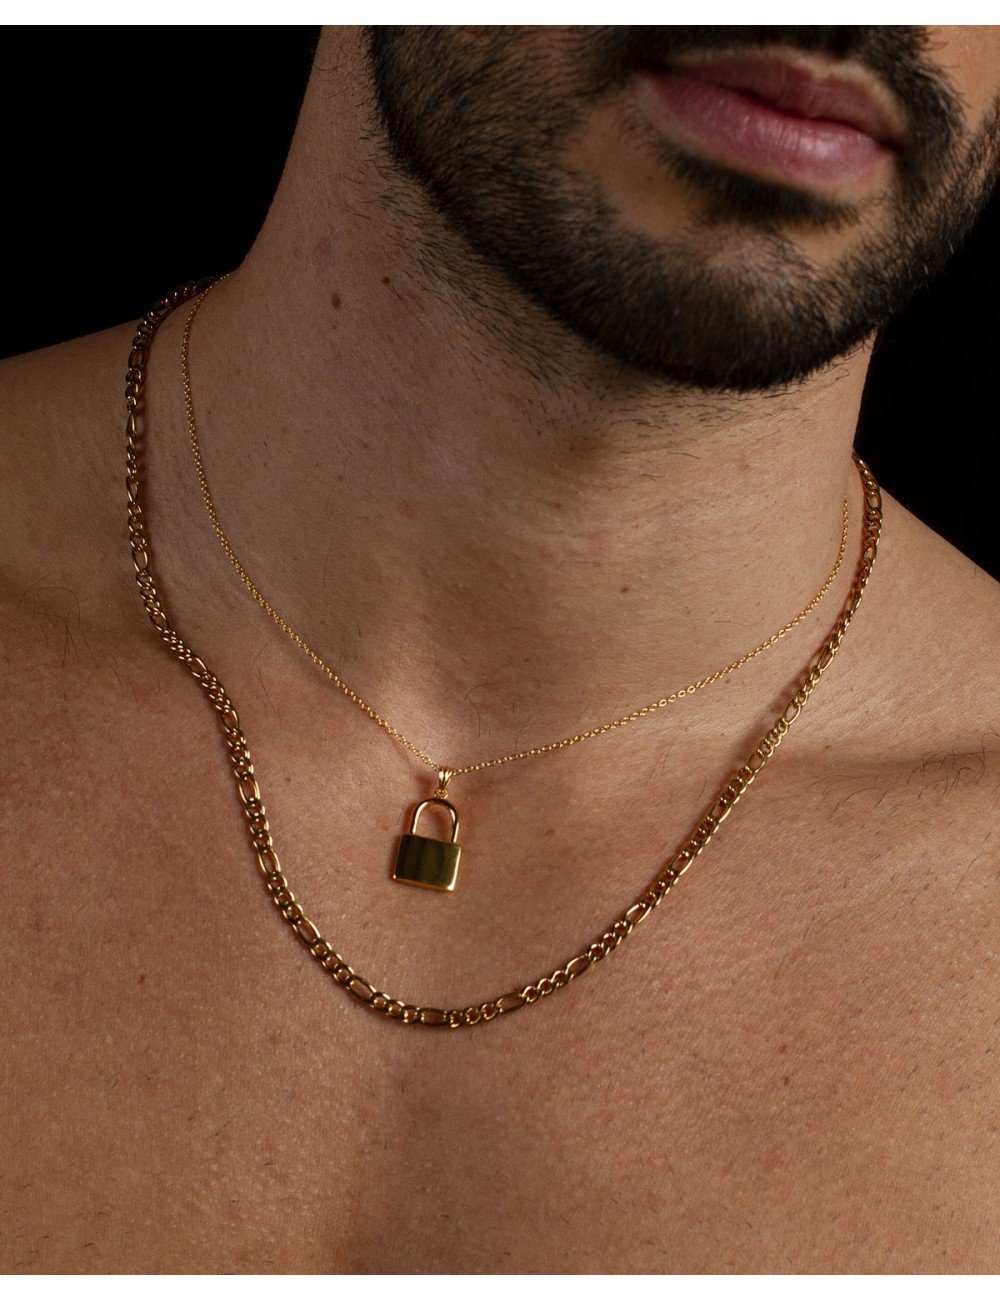 3 Layer Chain Necklace With Padlock | Mens chain necklace, Chain necklace,  Layered chain necklace